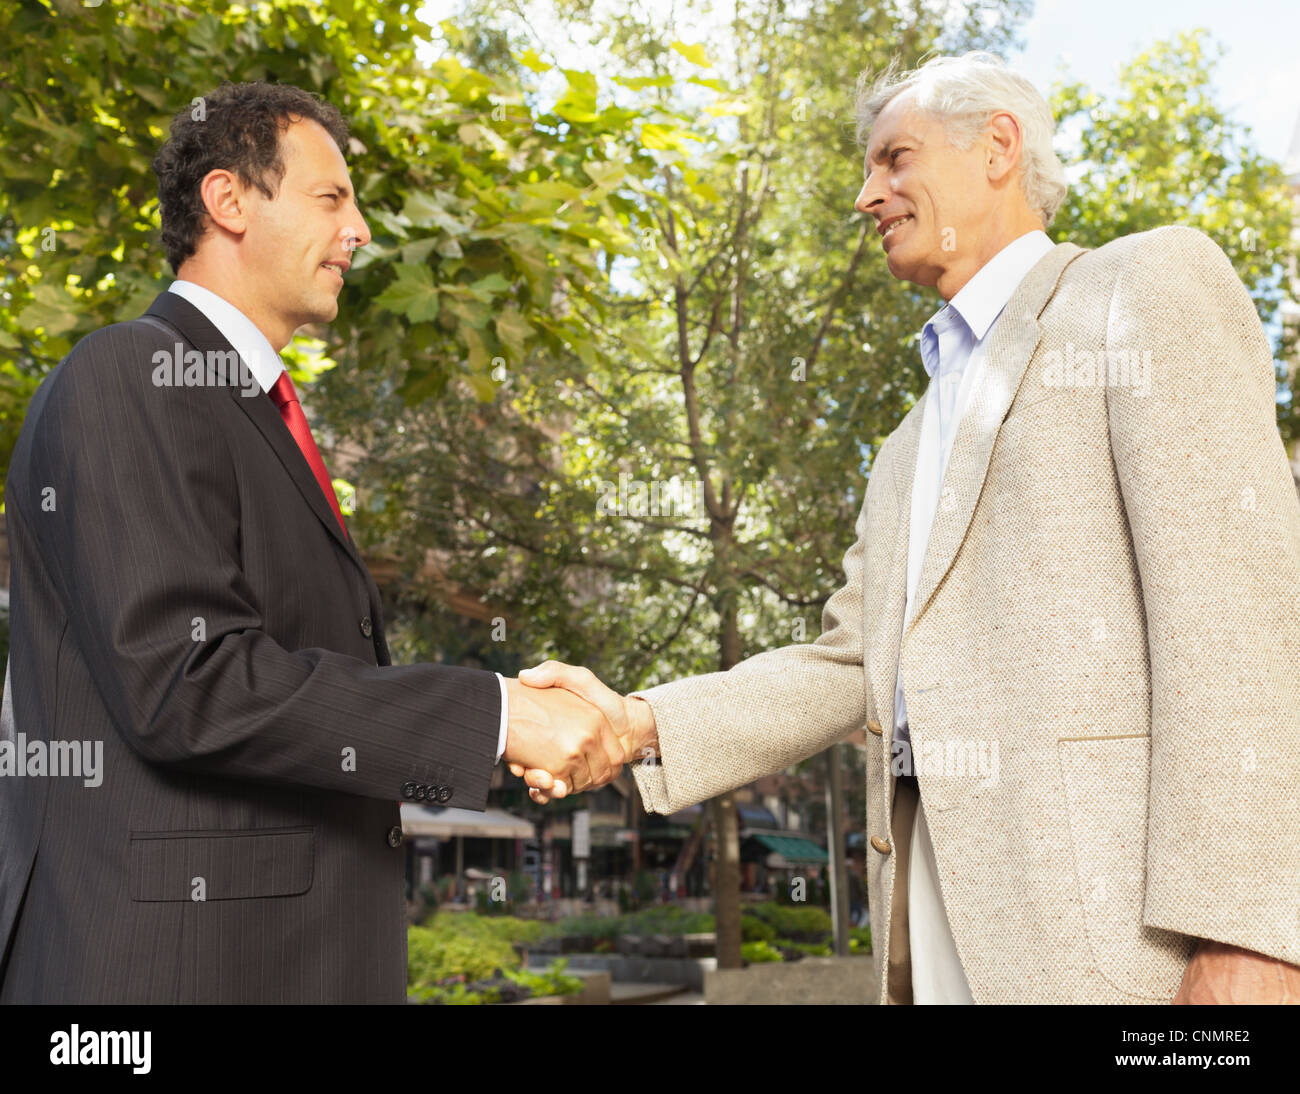 Businessmen shaking hands outdoors Stock Photo